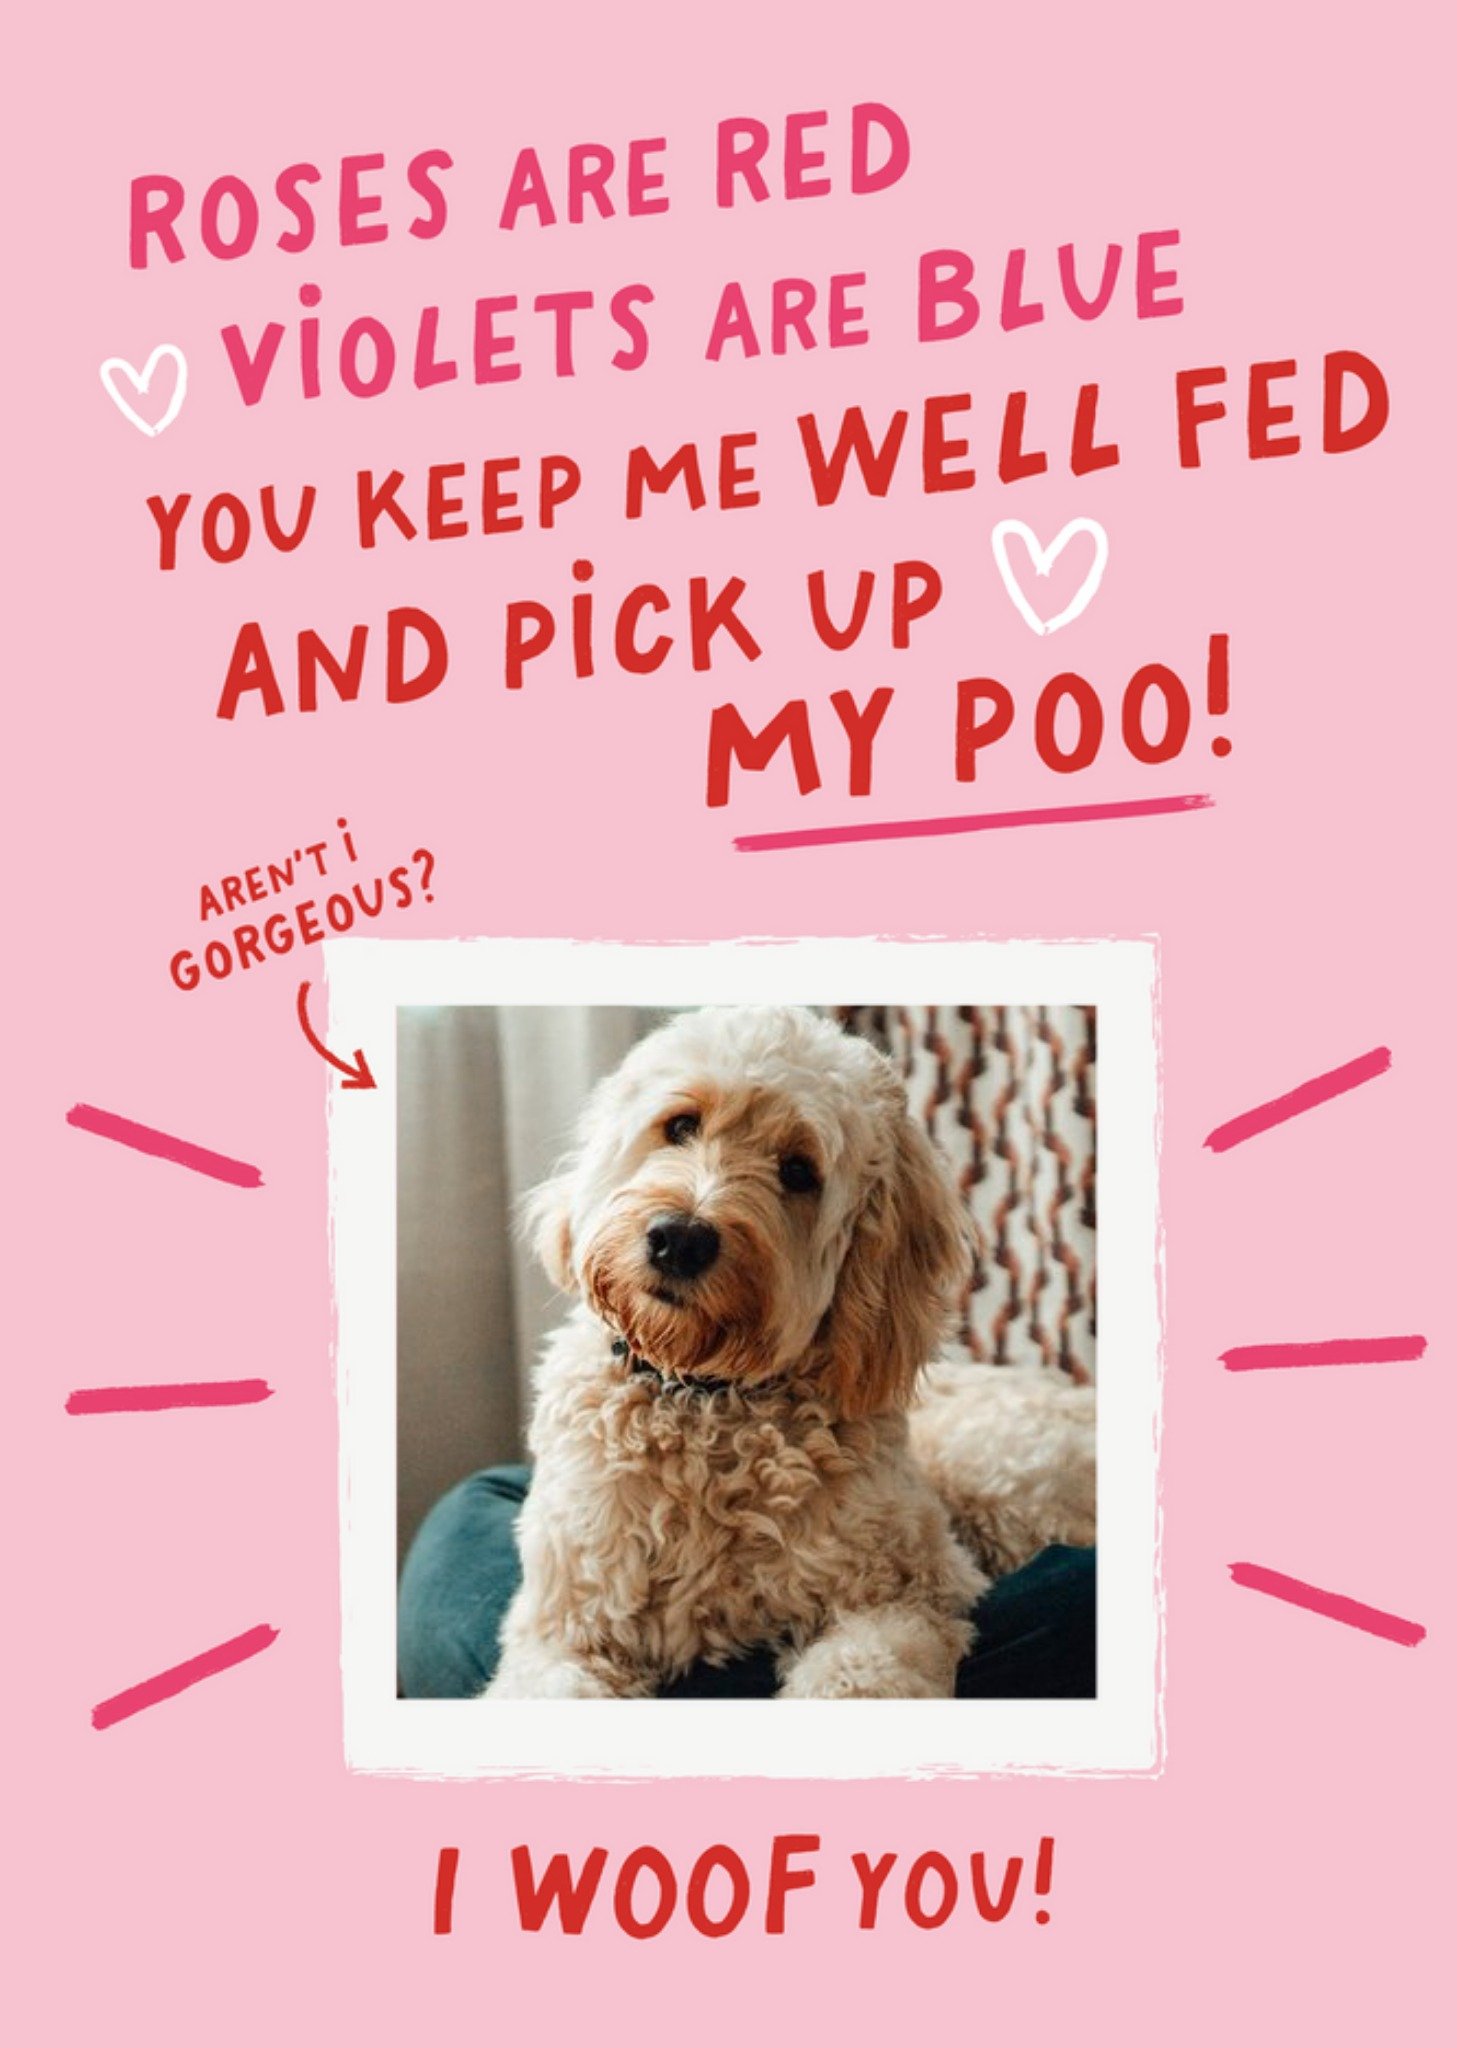 Moonpig Funny You Keep Me Well Fed And Pick Up My Poo From The Dog Photo Upload Valentine's Day Card